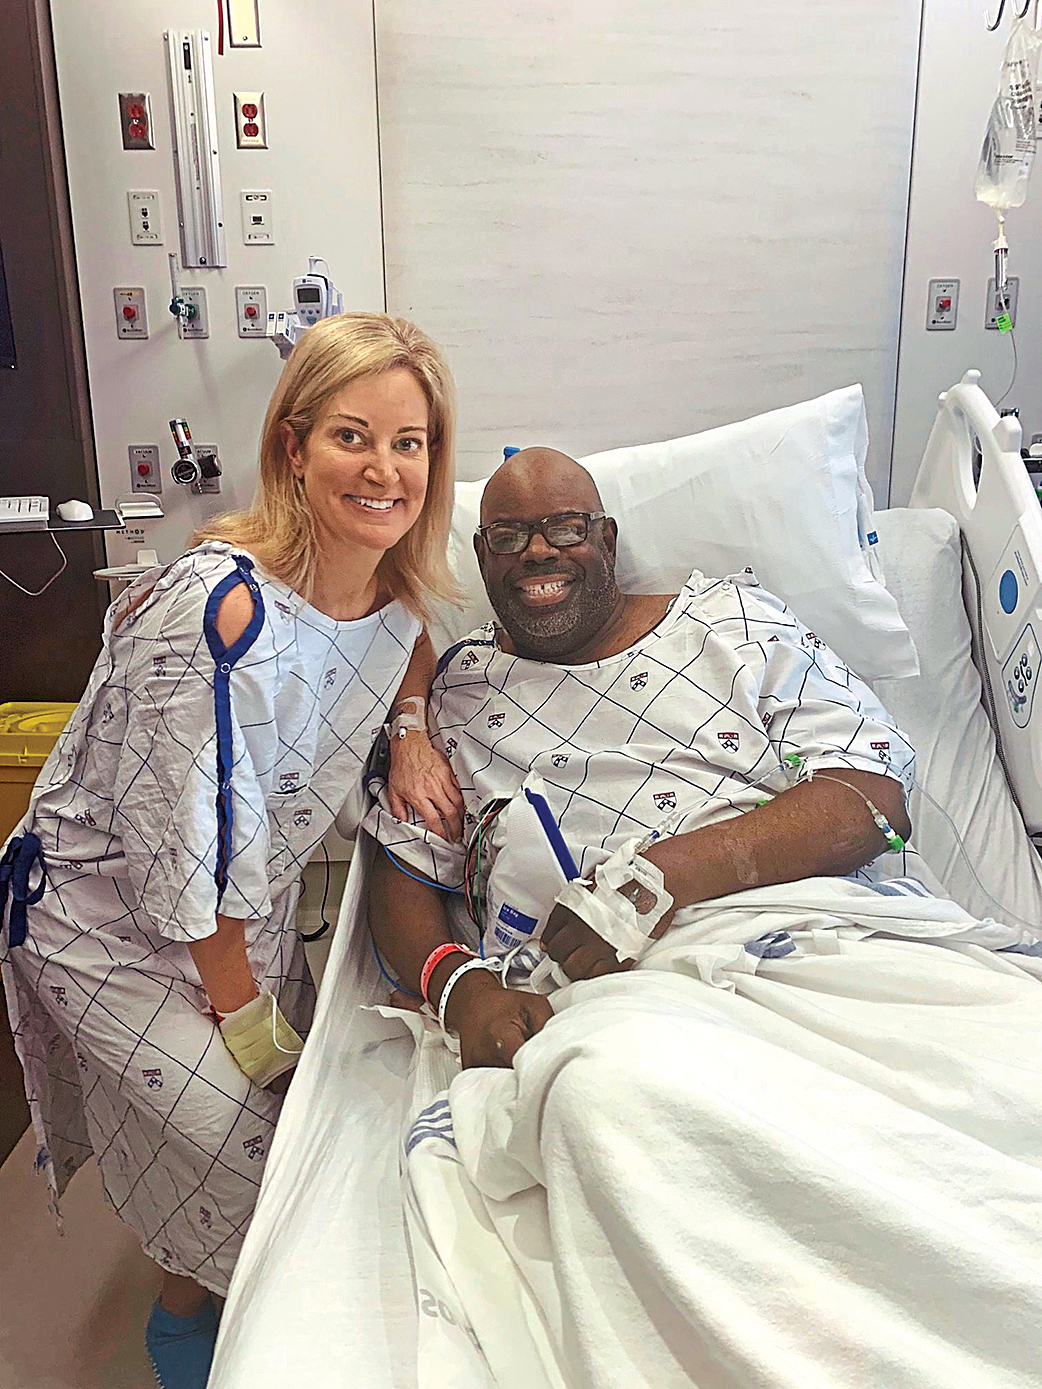 Molly Gray and Dan Napoleon posing in hospital following their kidney donation surgeries